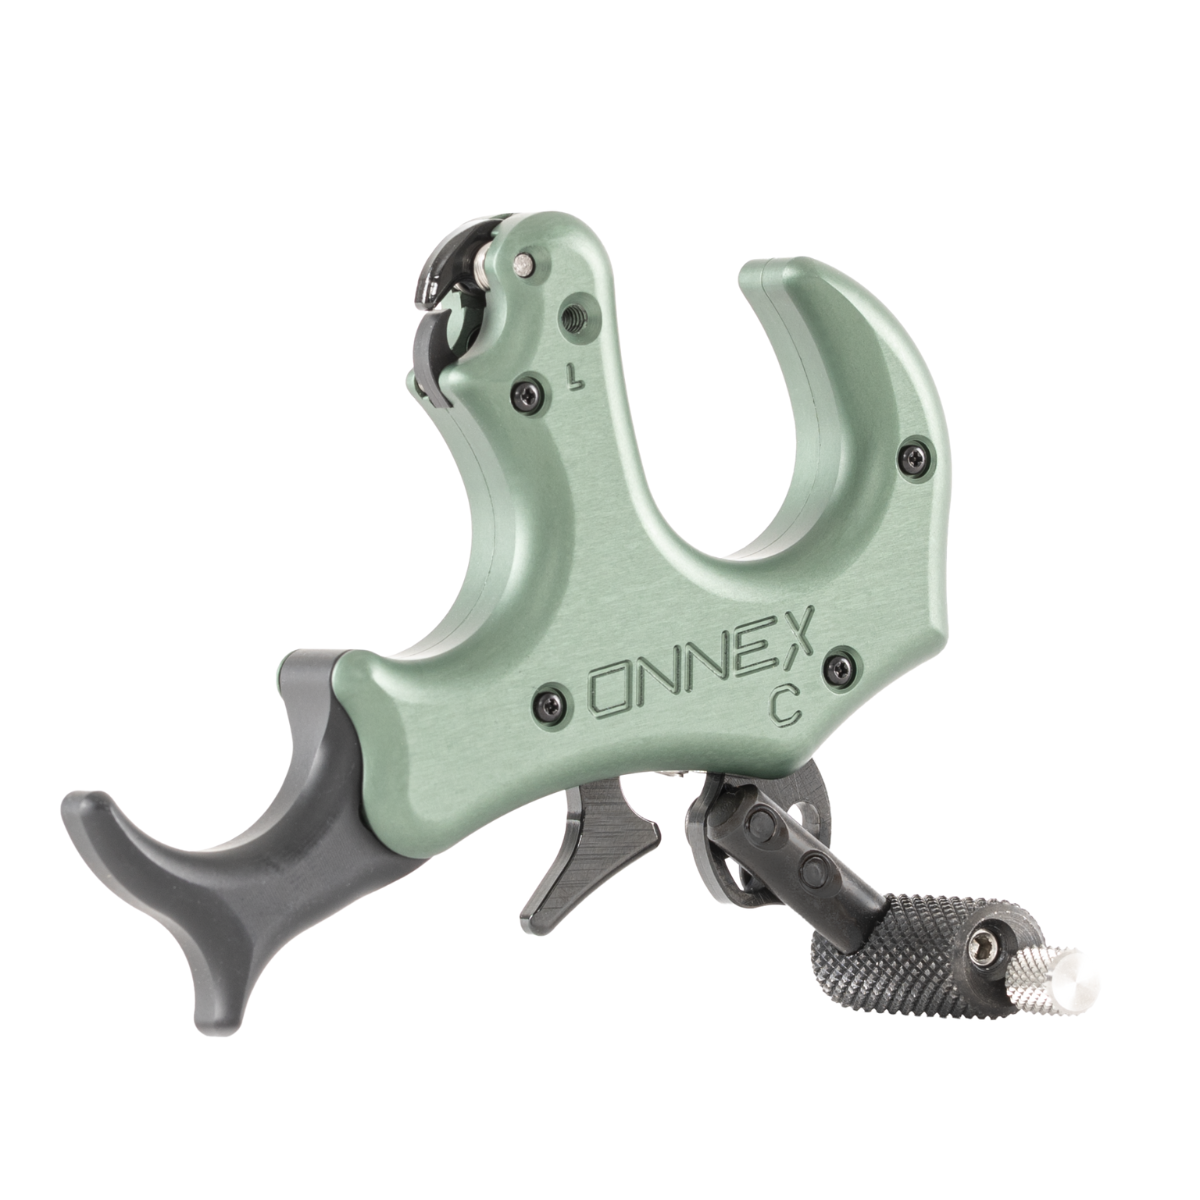 Stan OnneX Clicker Thumb Button Release (Sage Green)